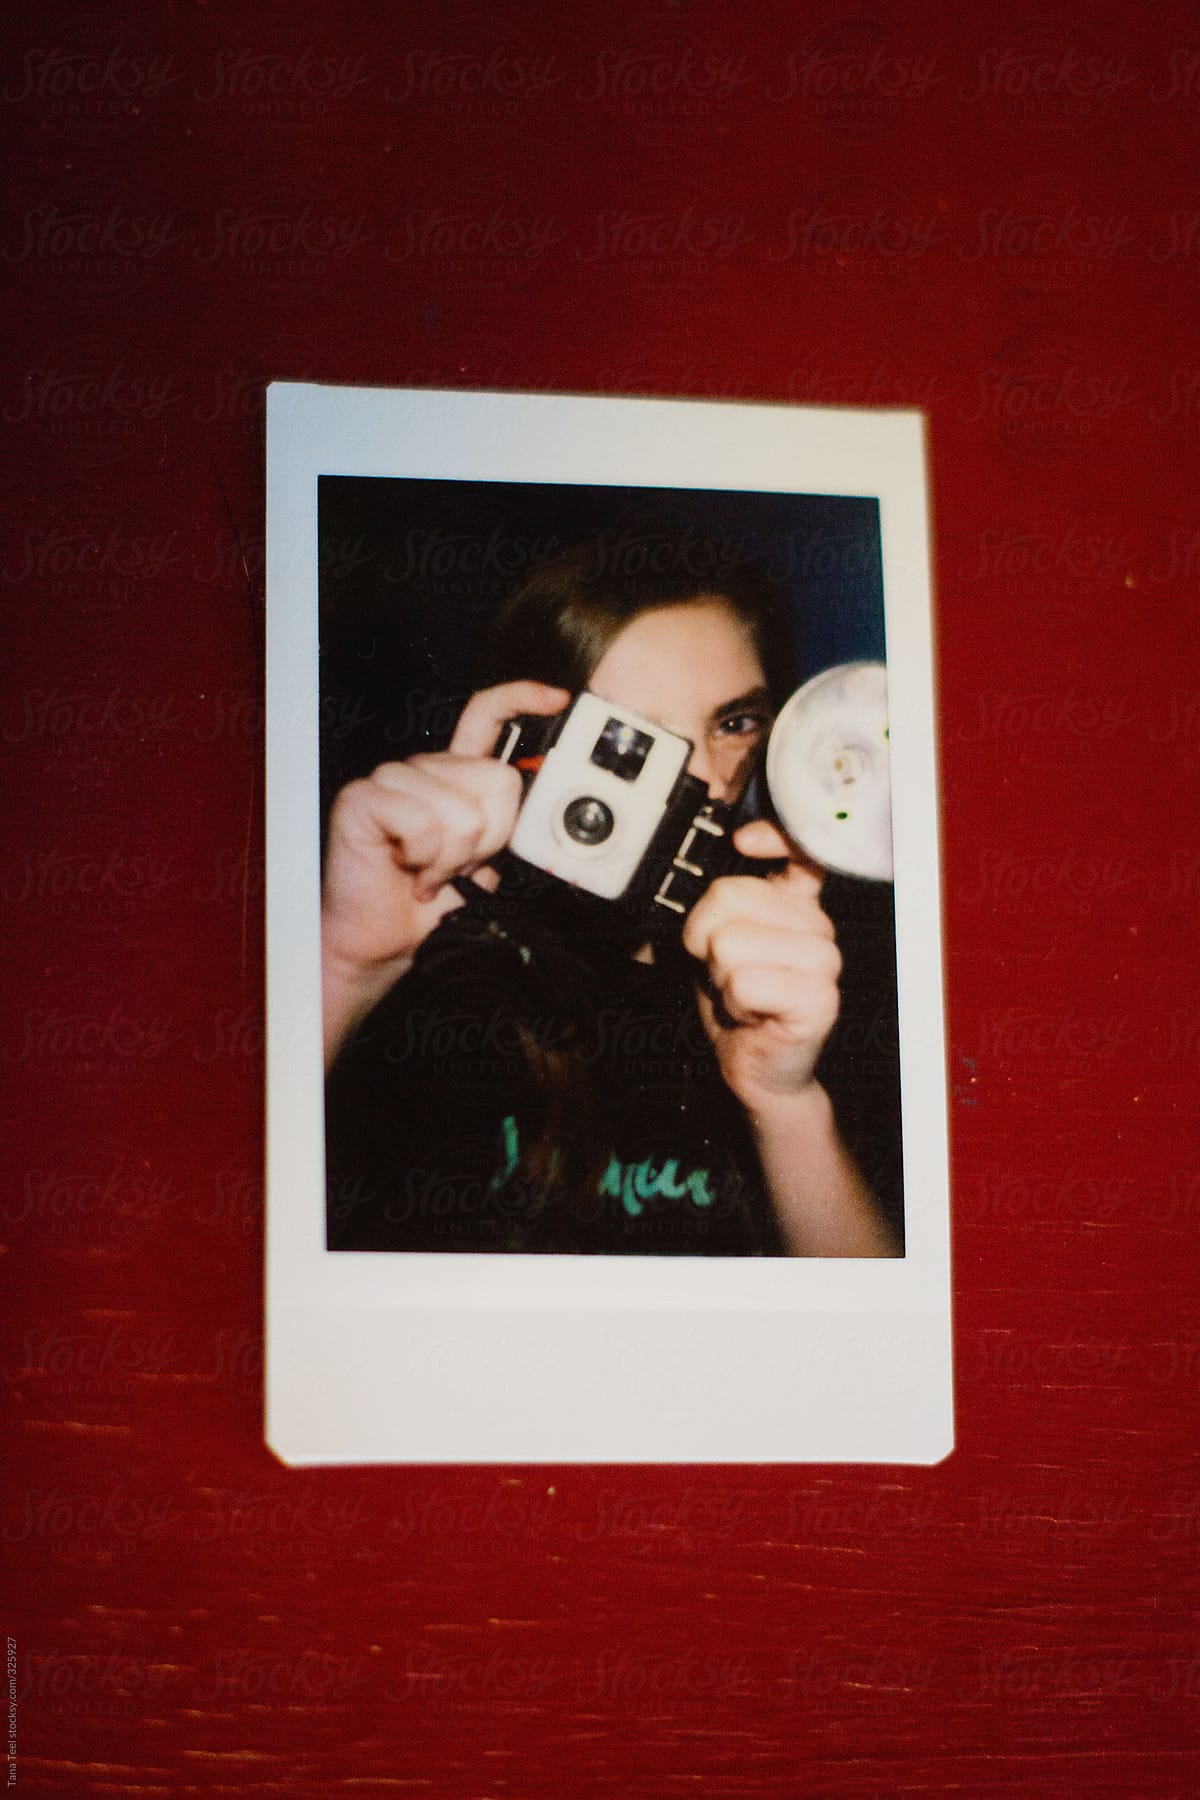 Mini polaroid image of teen taking pictures with old camera